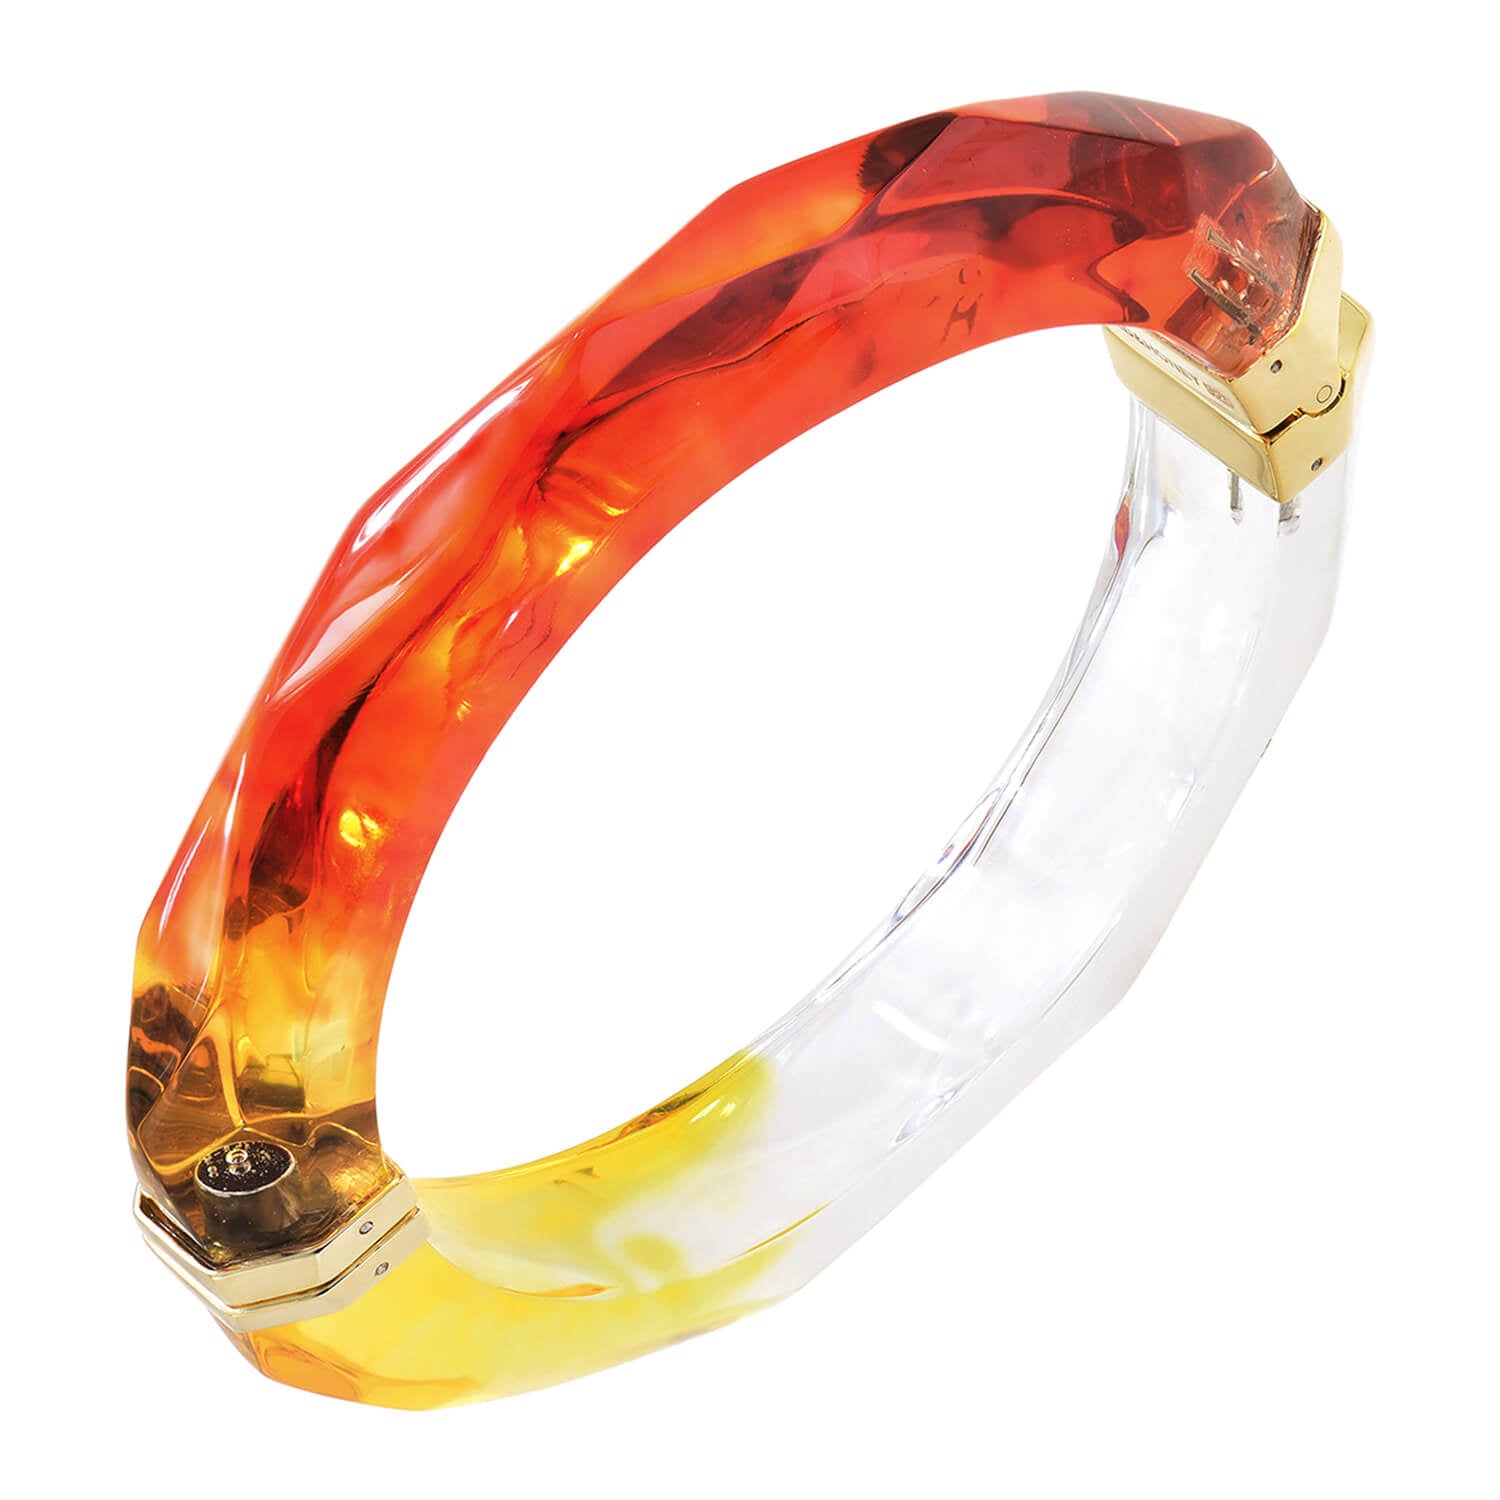 Tie Dye Hinge Bangle in Red & Yellow